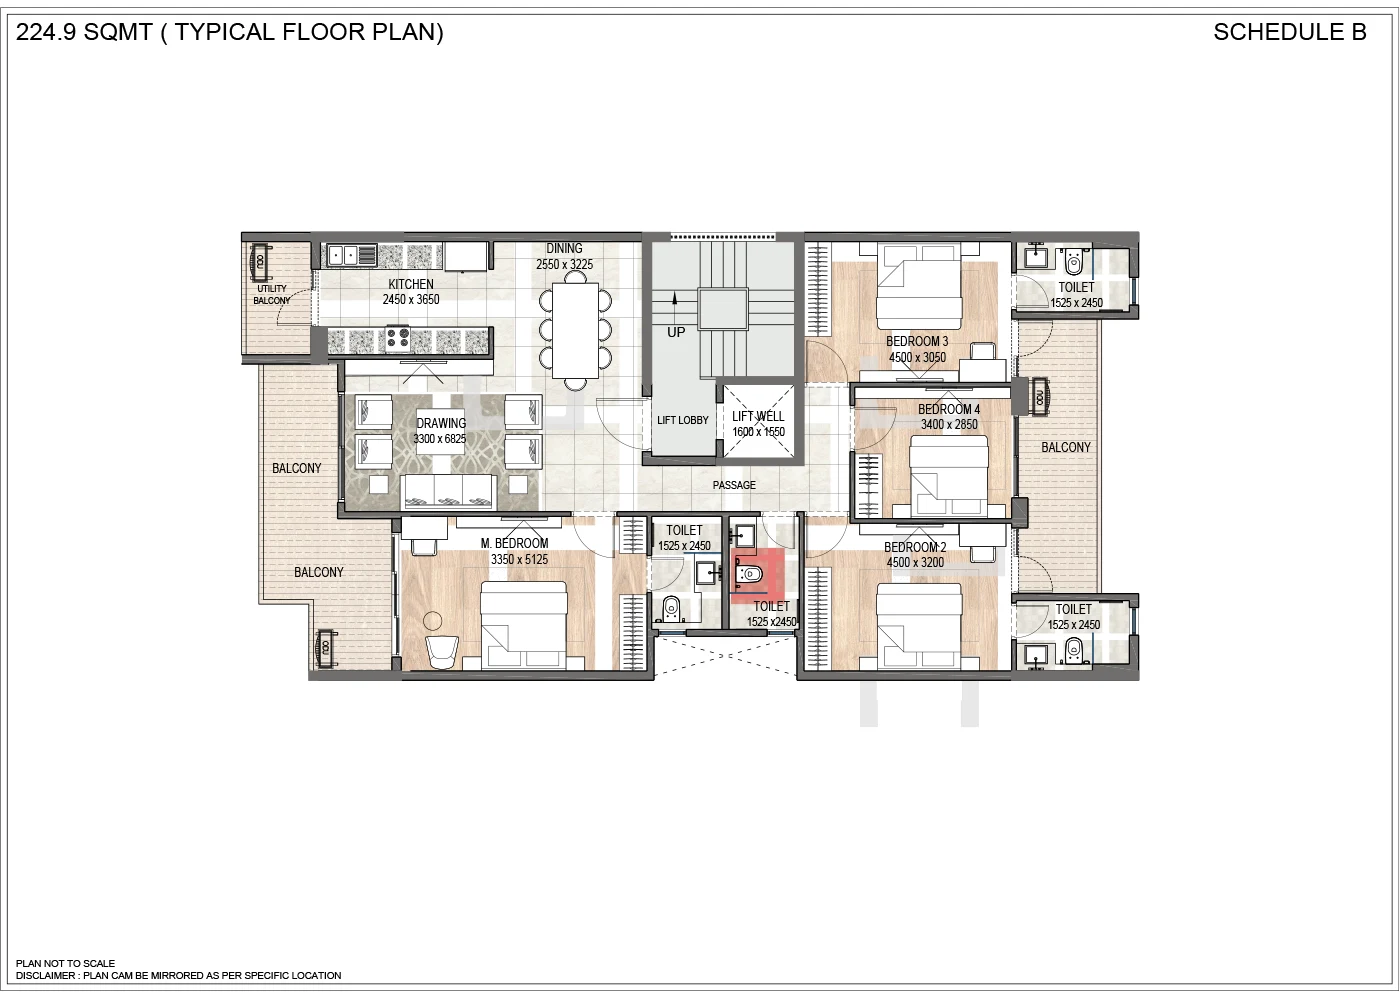 4bhk-typical-224.9-sqmt